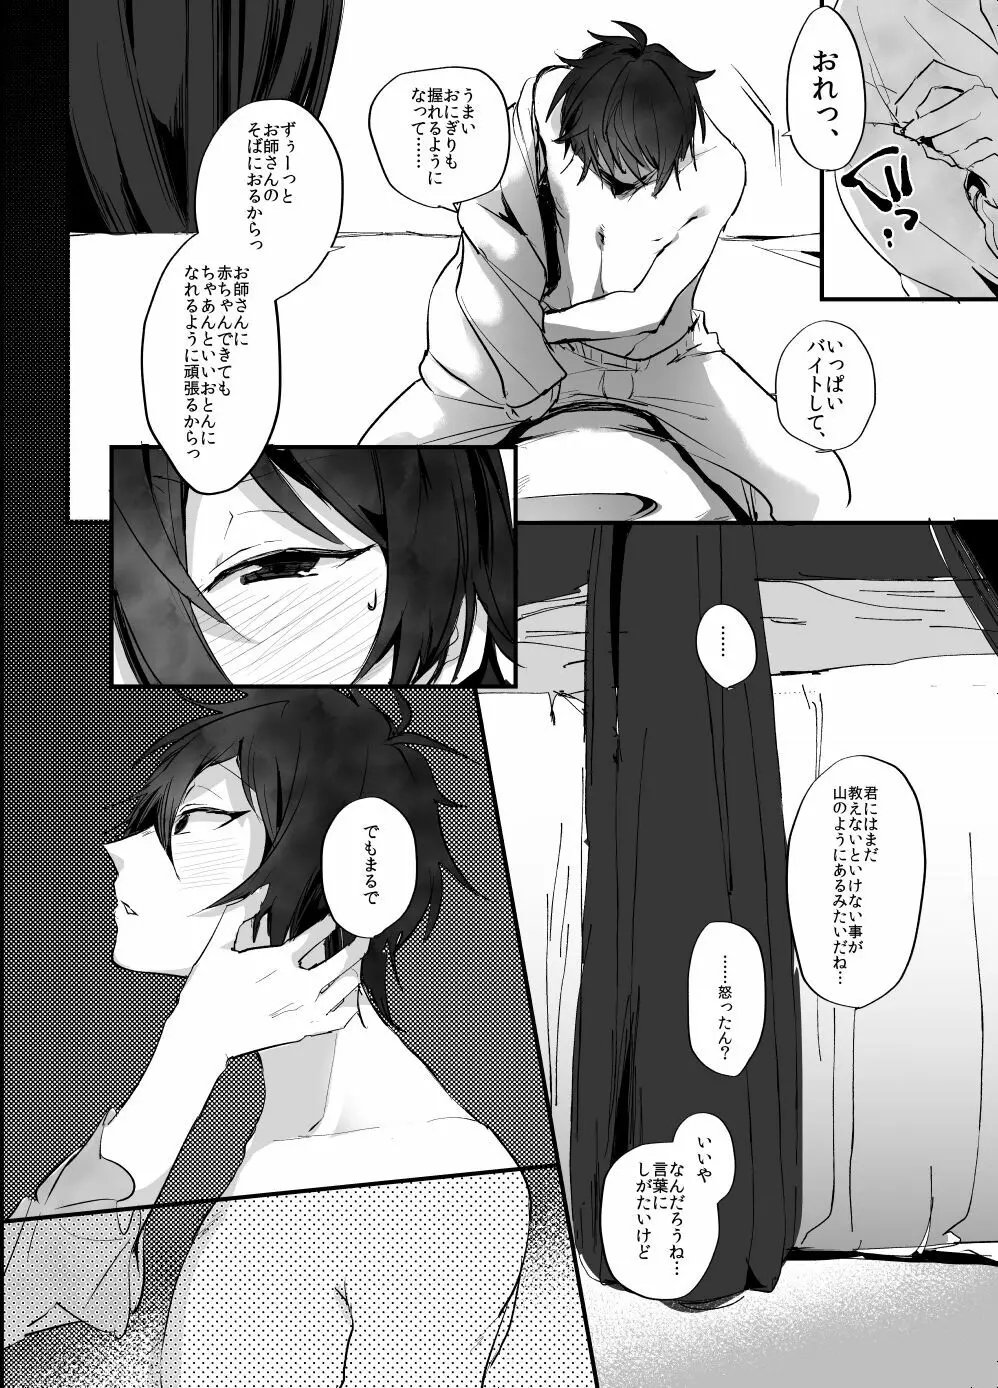 Ｒ18】web再録みか宗 Page.30